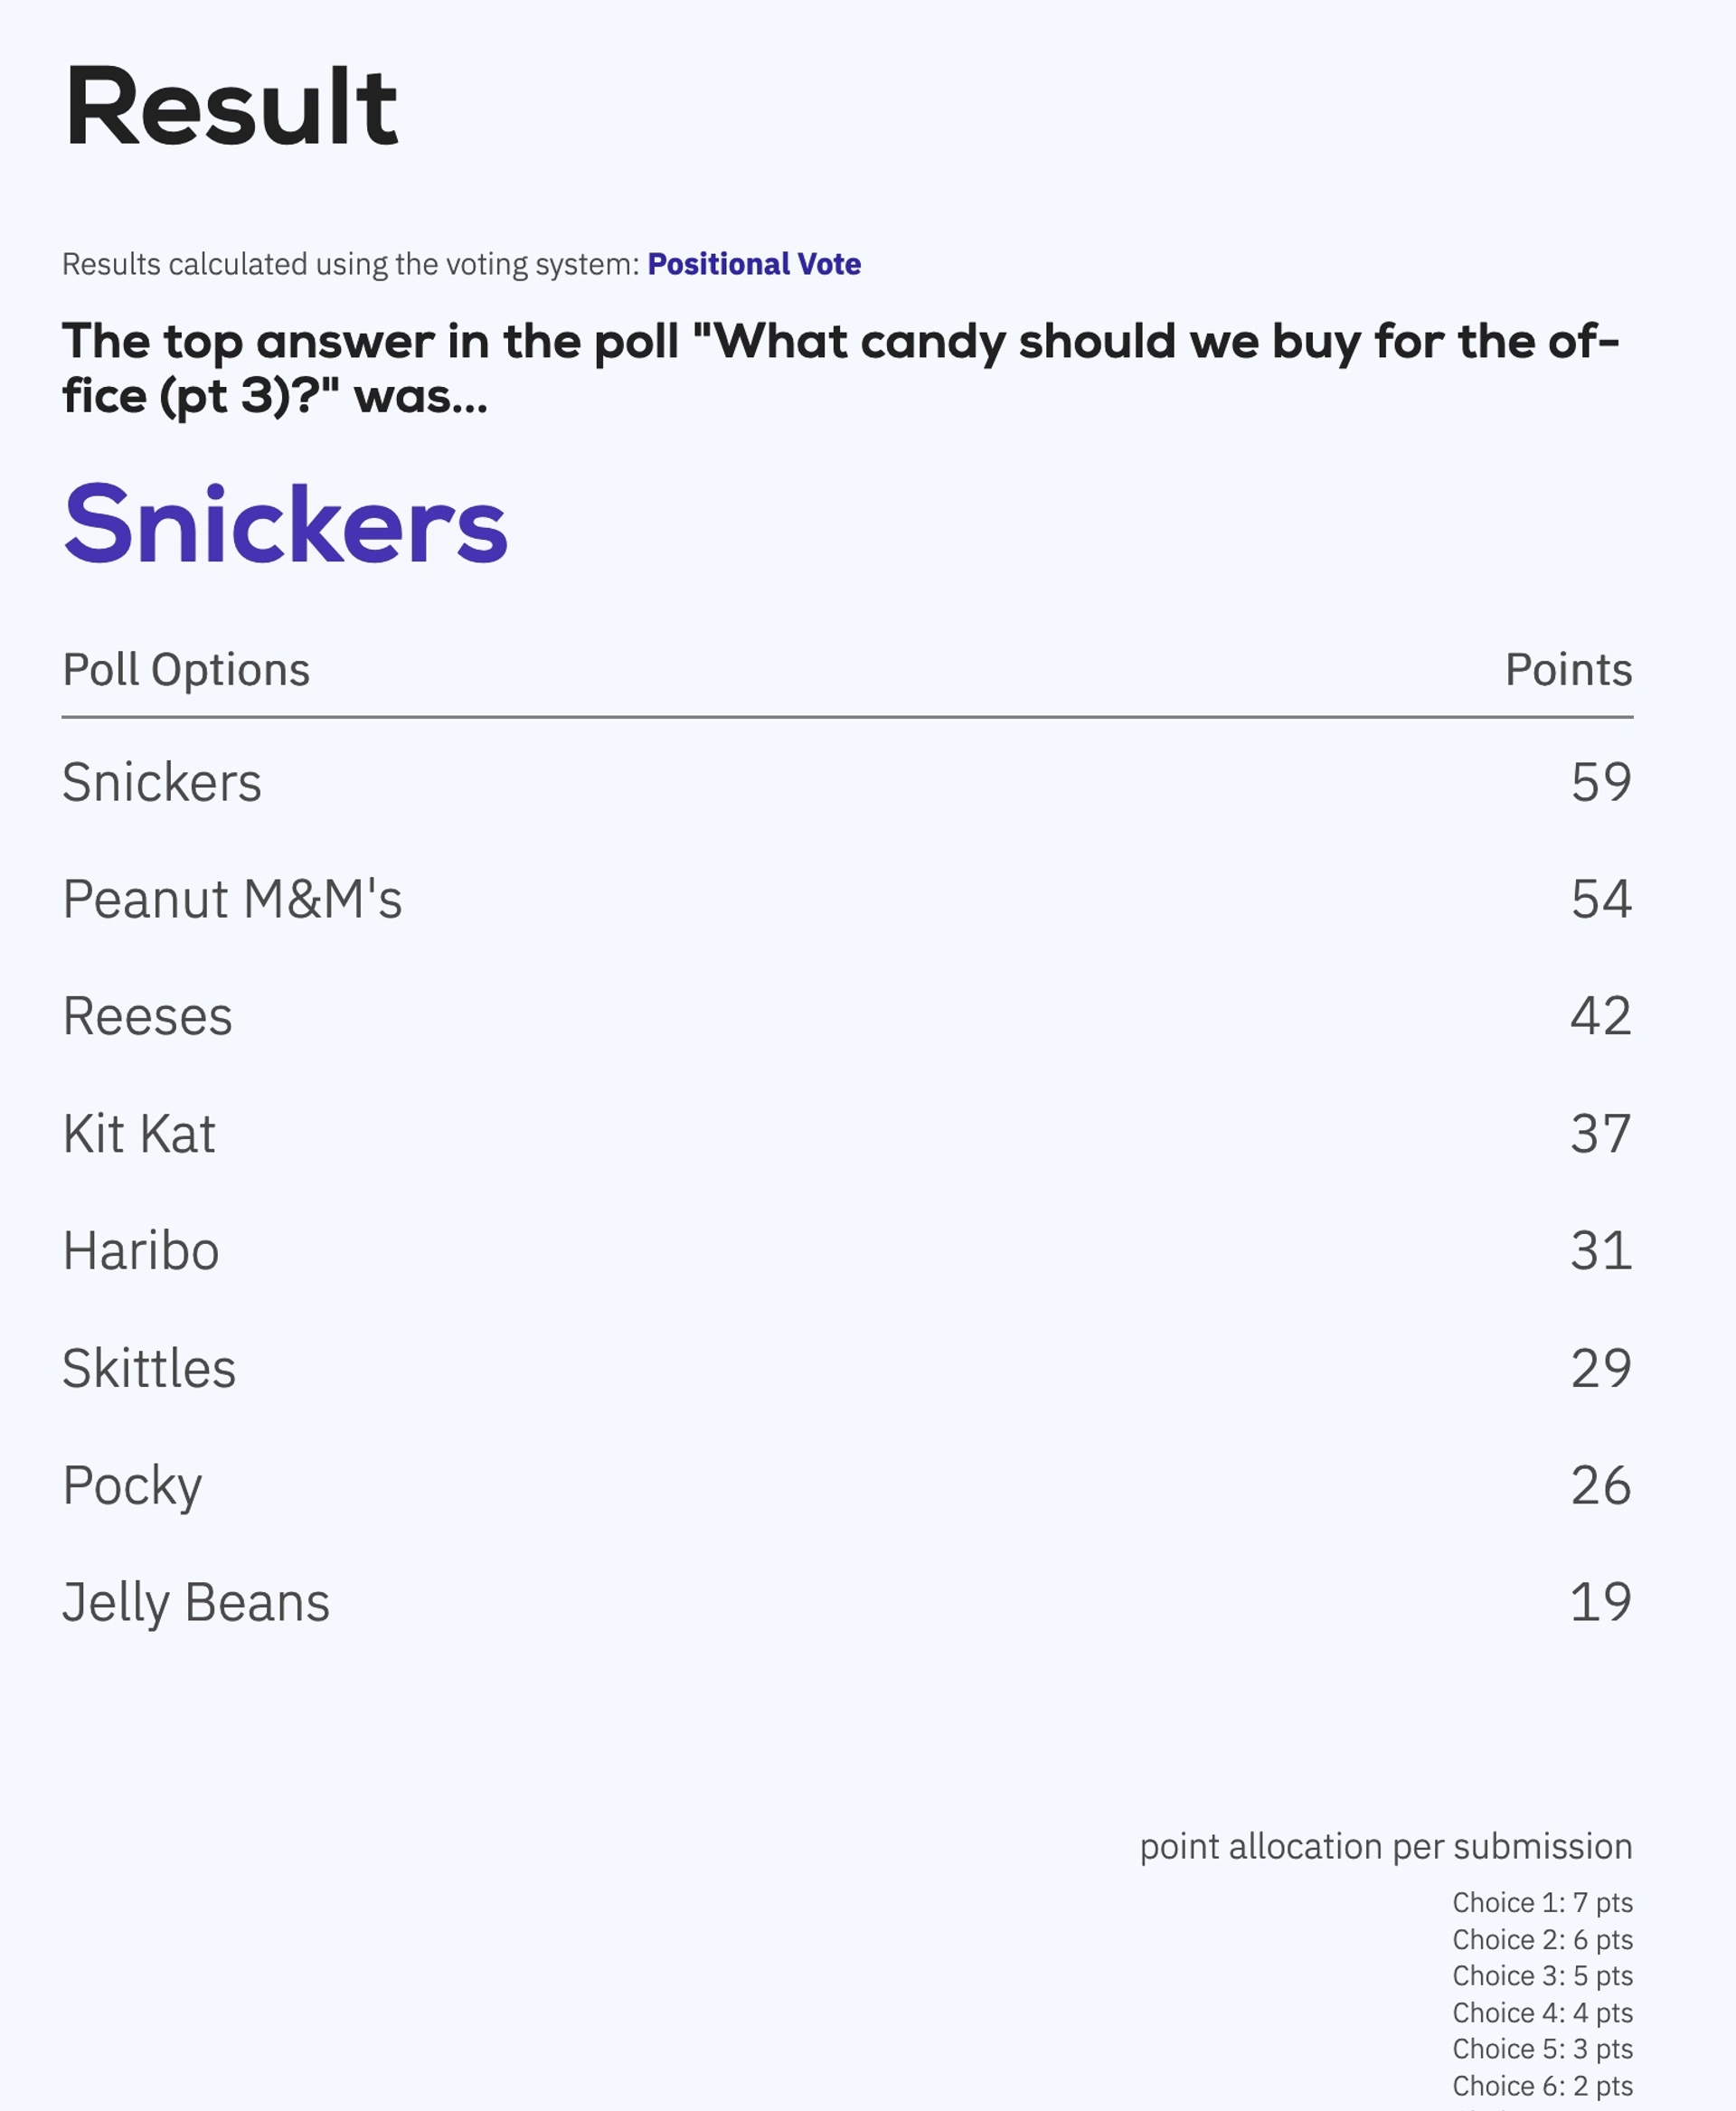 The results for the positional voting system, revealing Snickers to be the winner.